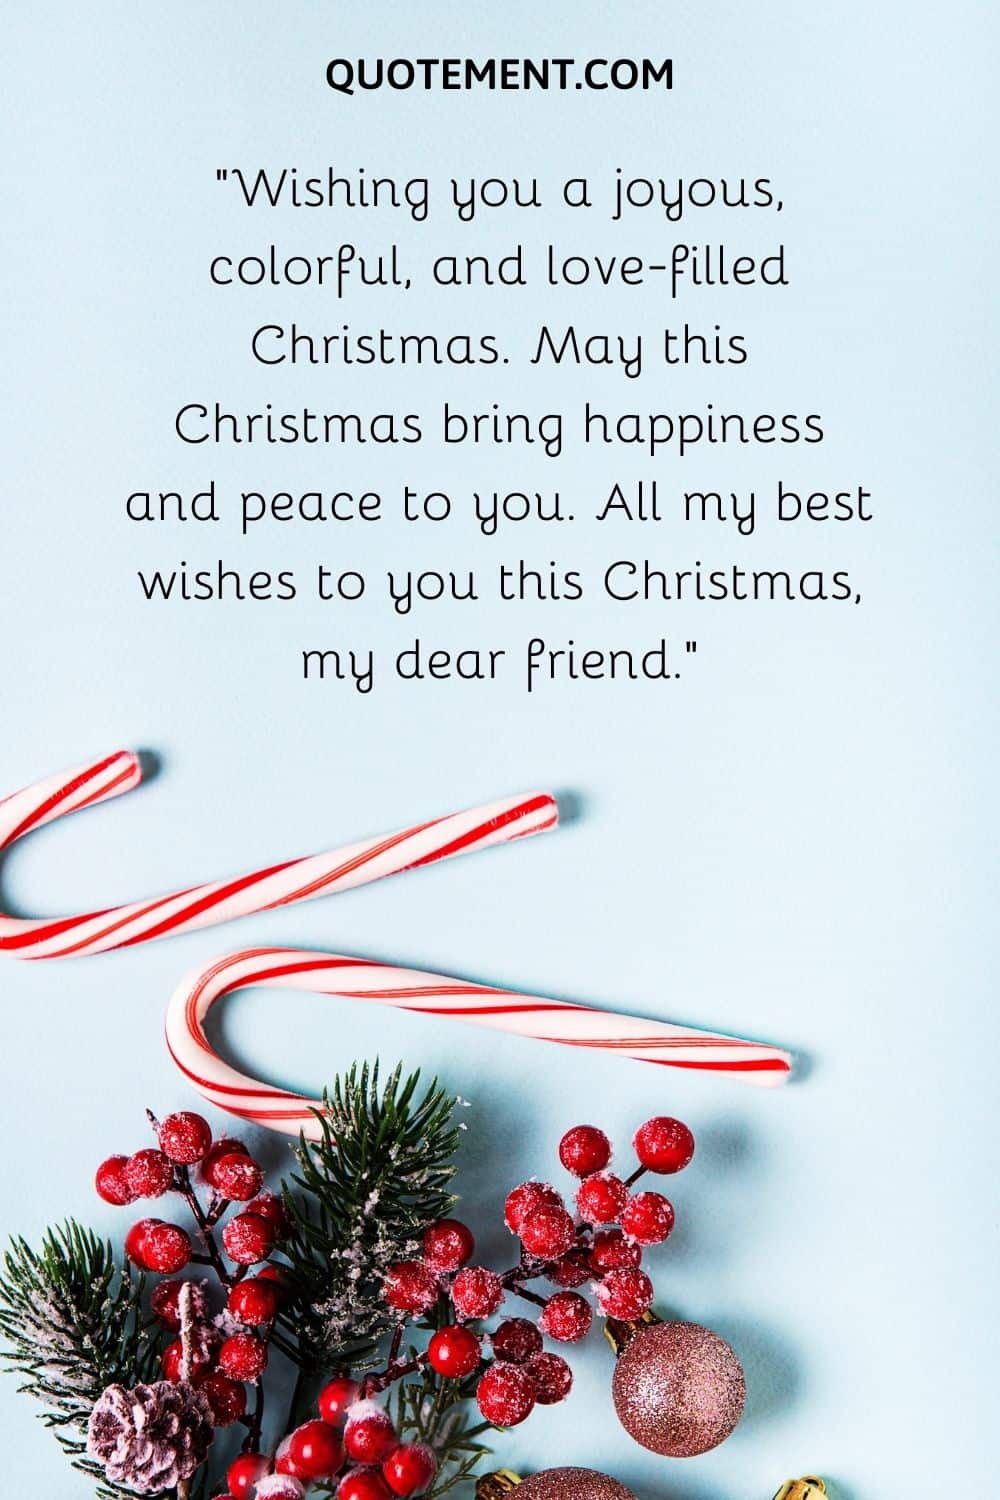 Wishing you a joyous, colorful, and love-filled Christmas